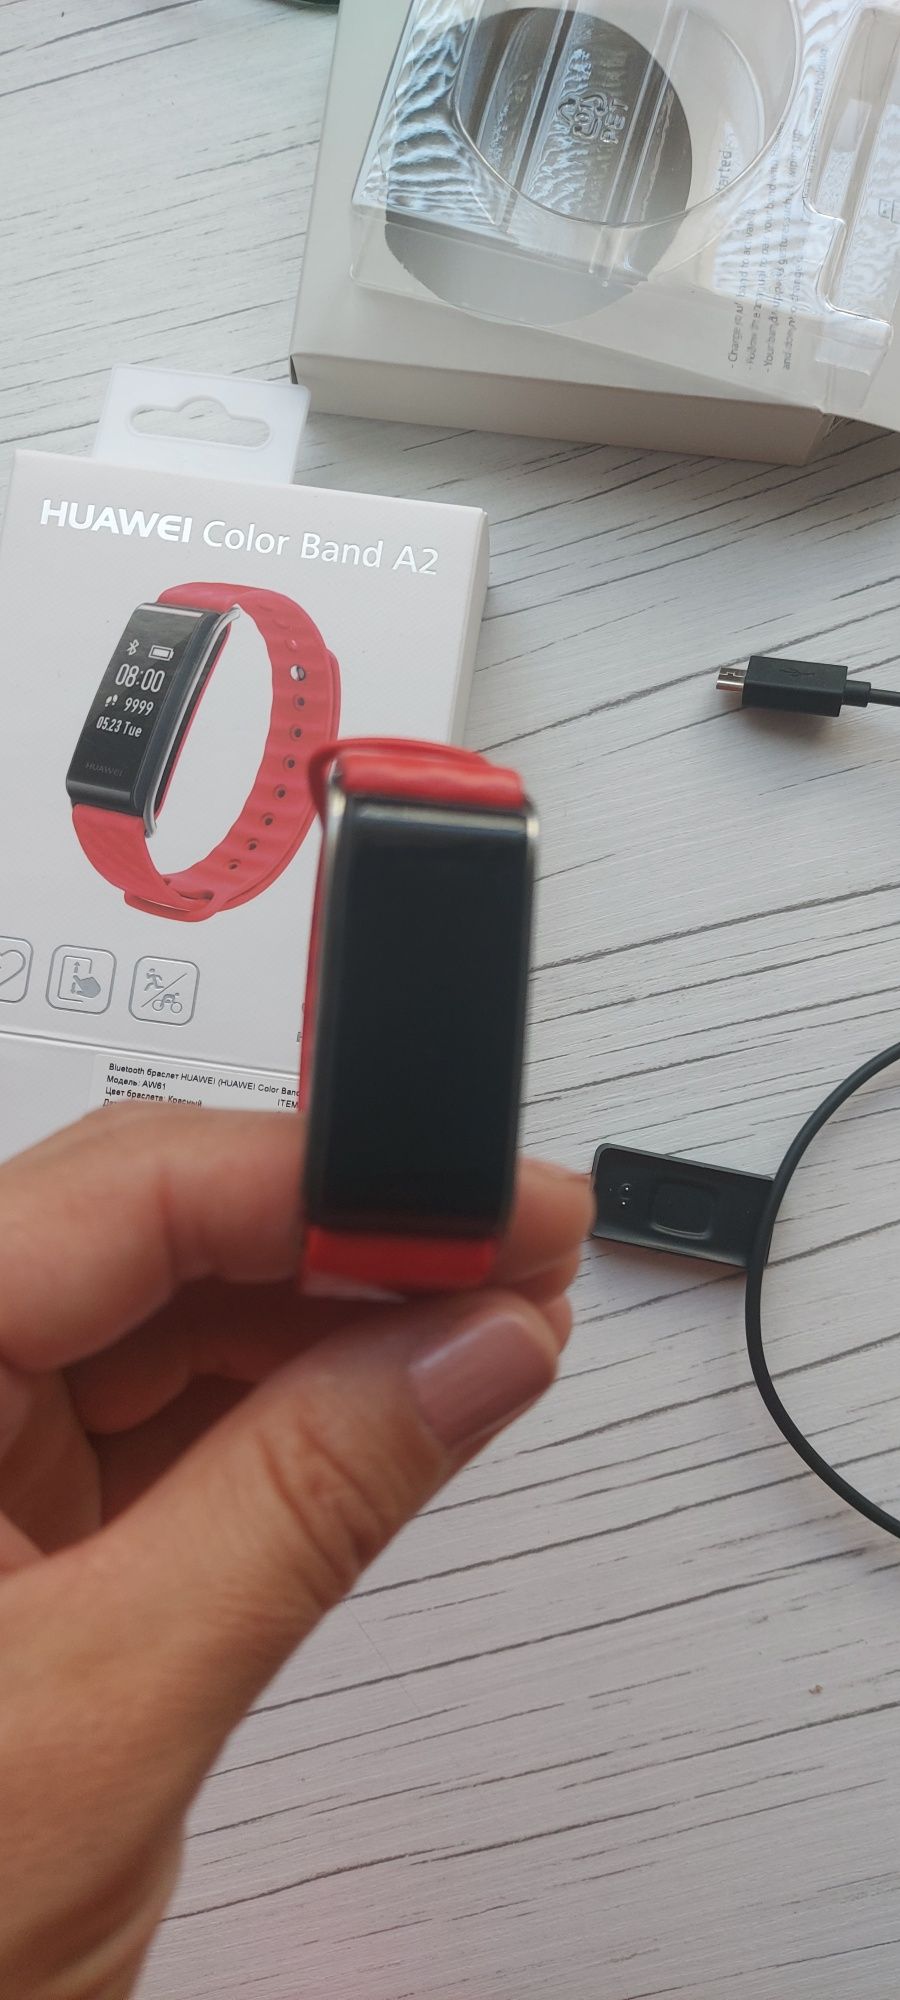 Huawei color Band A2